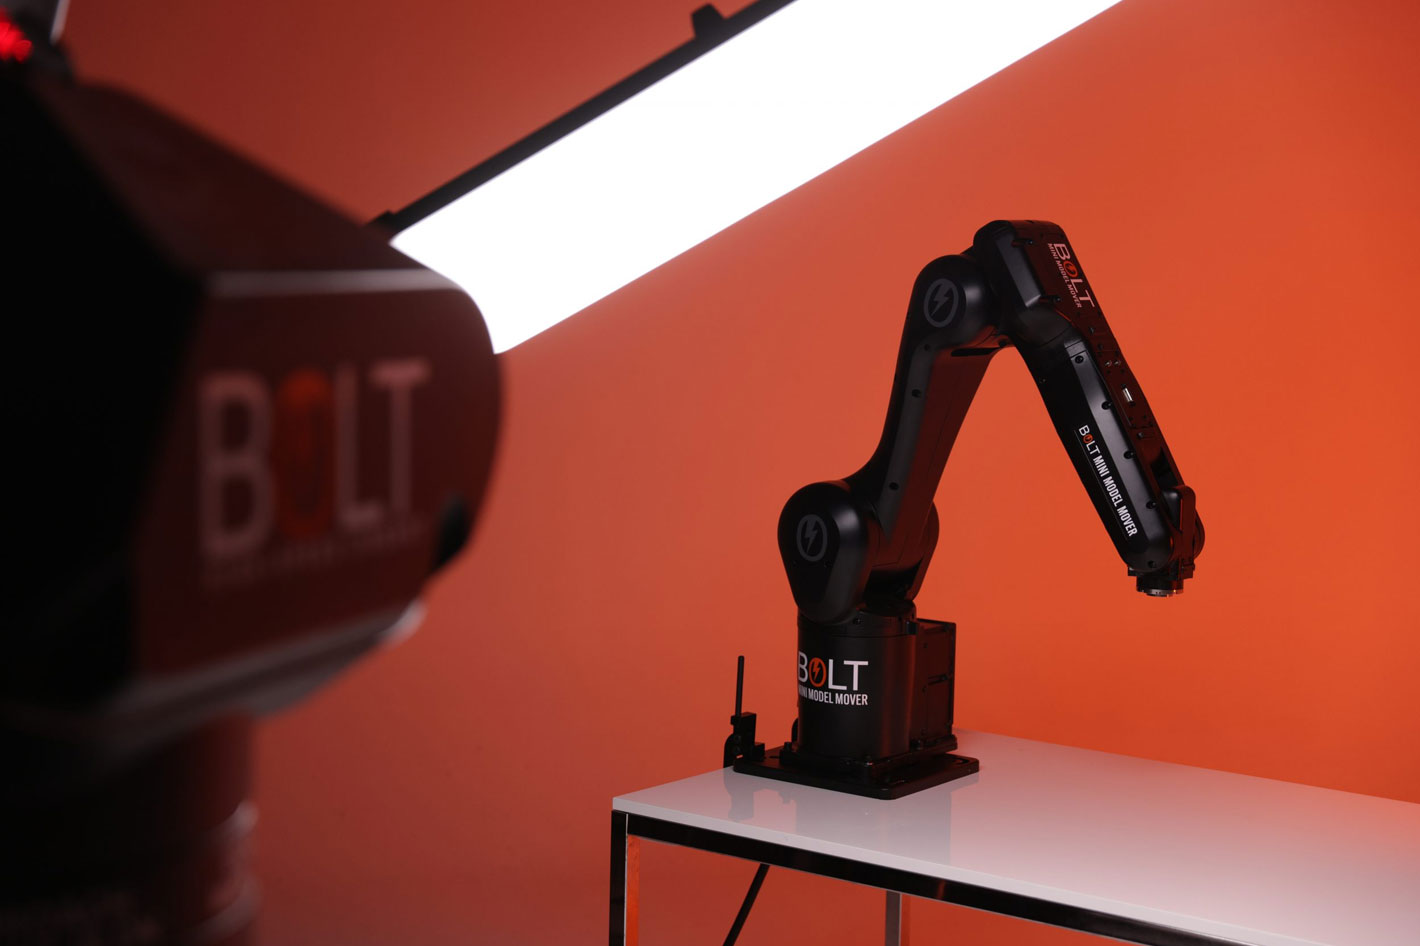 Bolt Mini Model Mover: the smallest robotic arm from MRMC